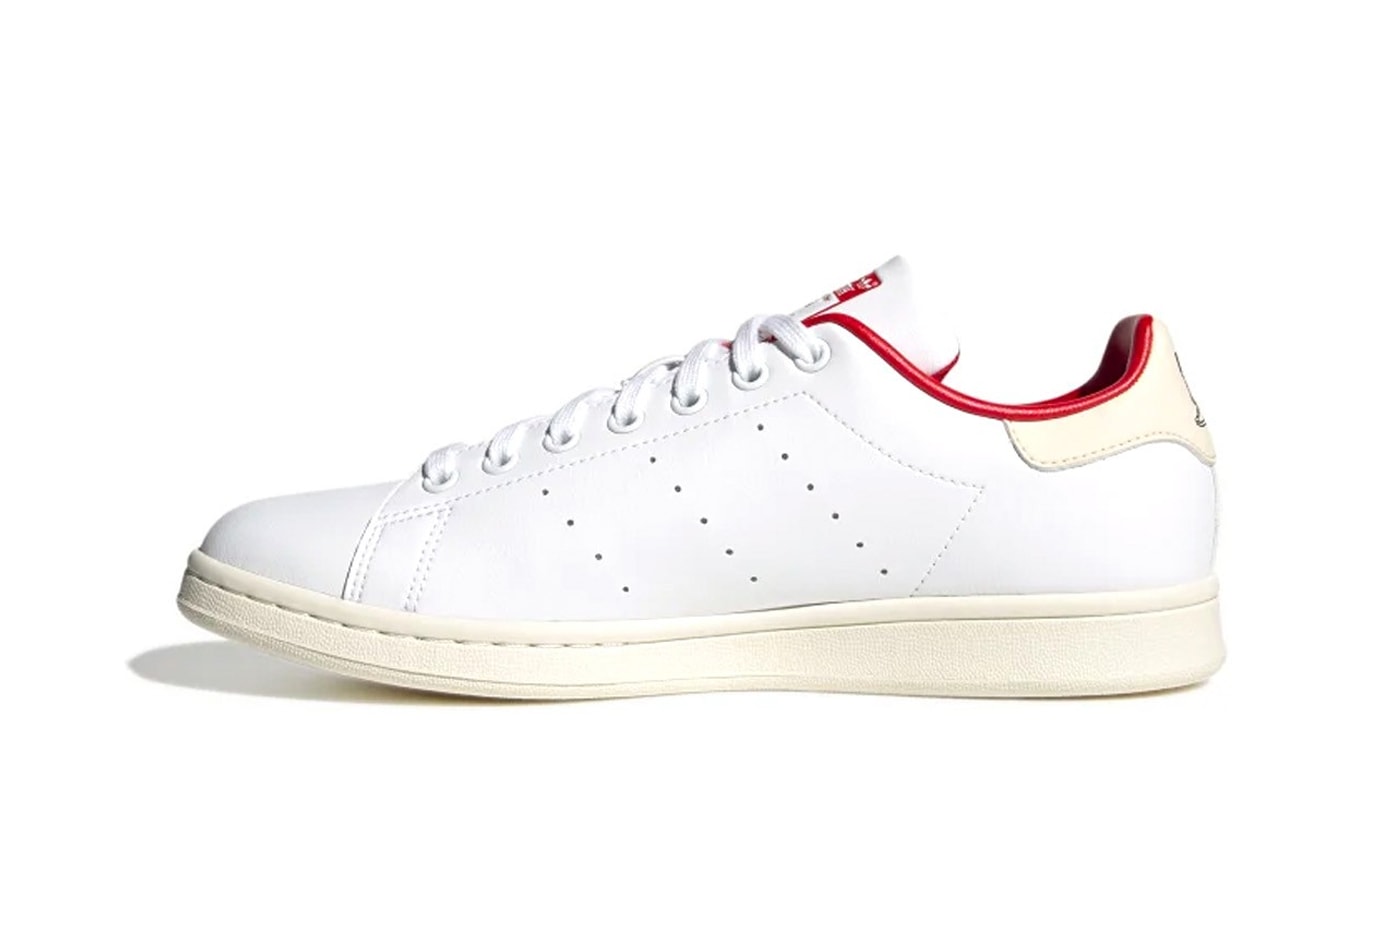 Audi Quattro gecko red stan smith shoes